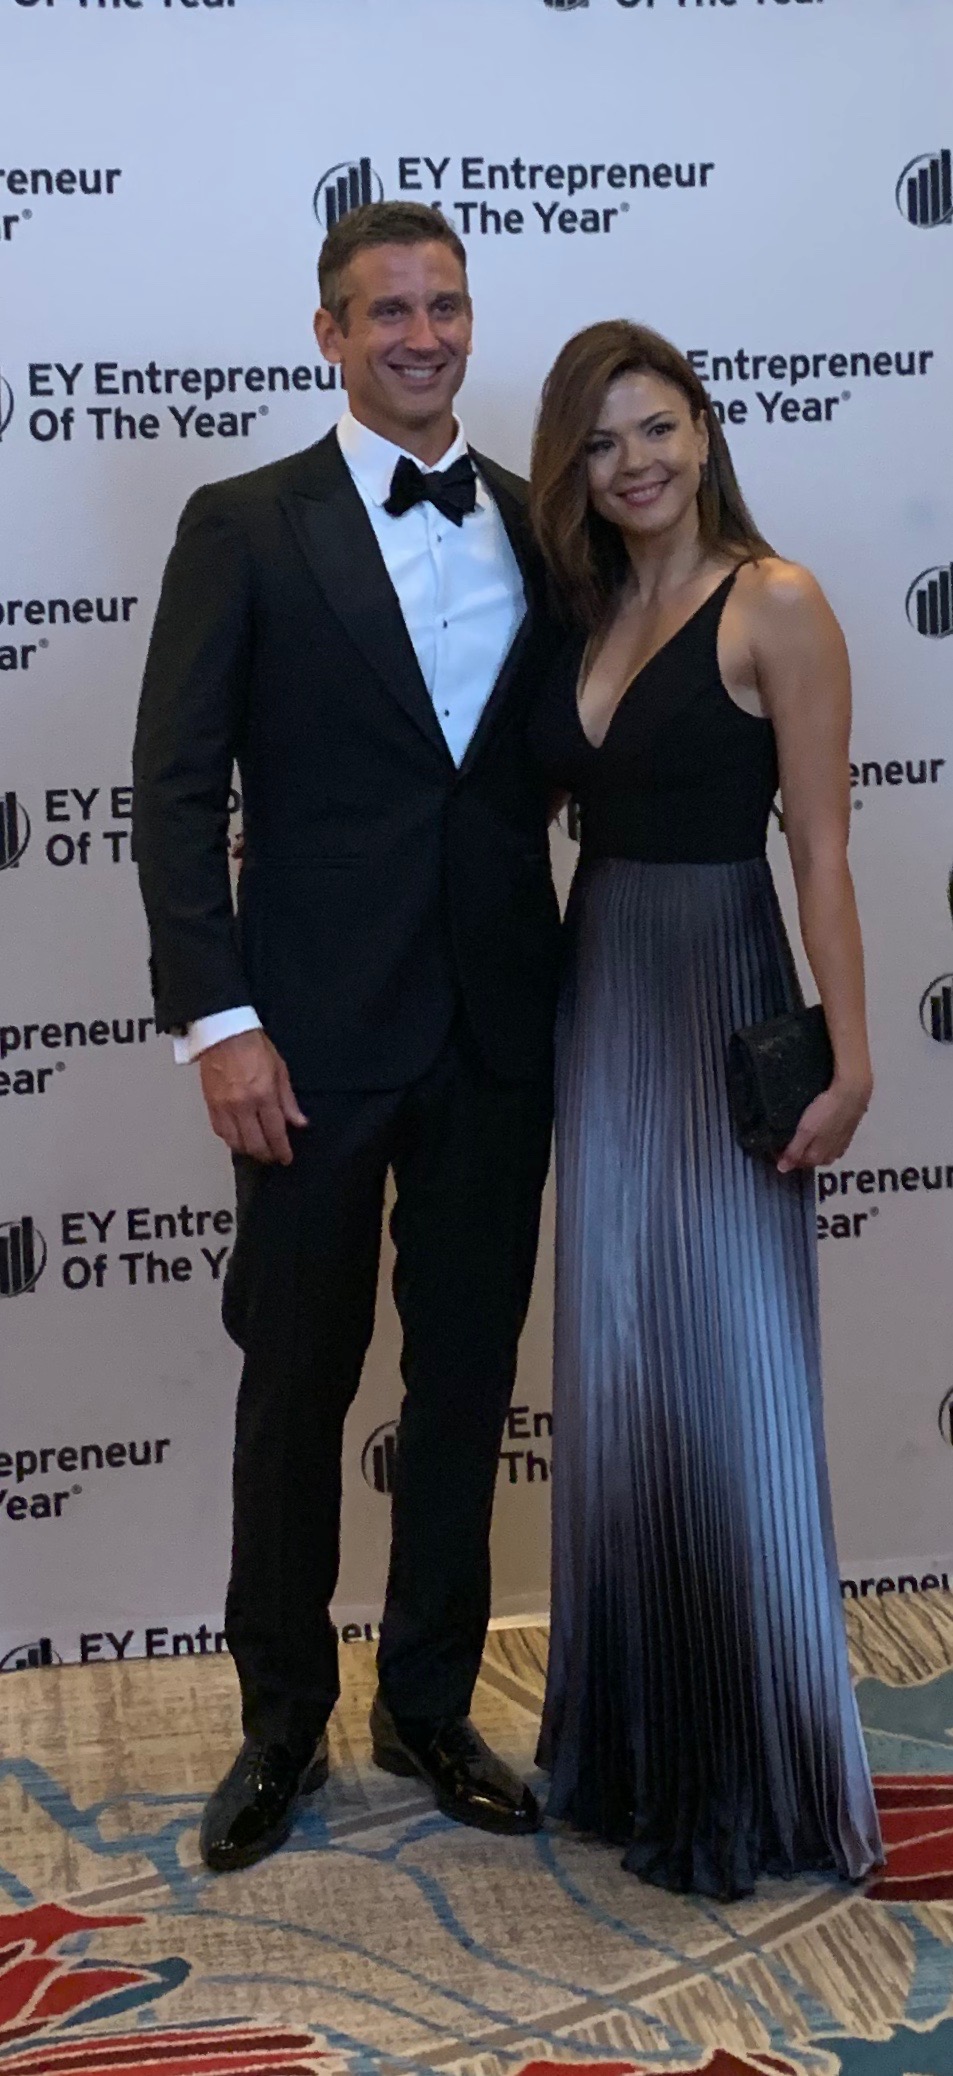 Rob and wife, Takhmina Ceravolo attend the EY Entrepreneur of the Year gala in Orlando, Florida